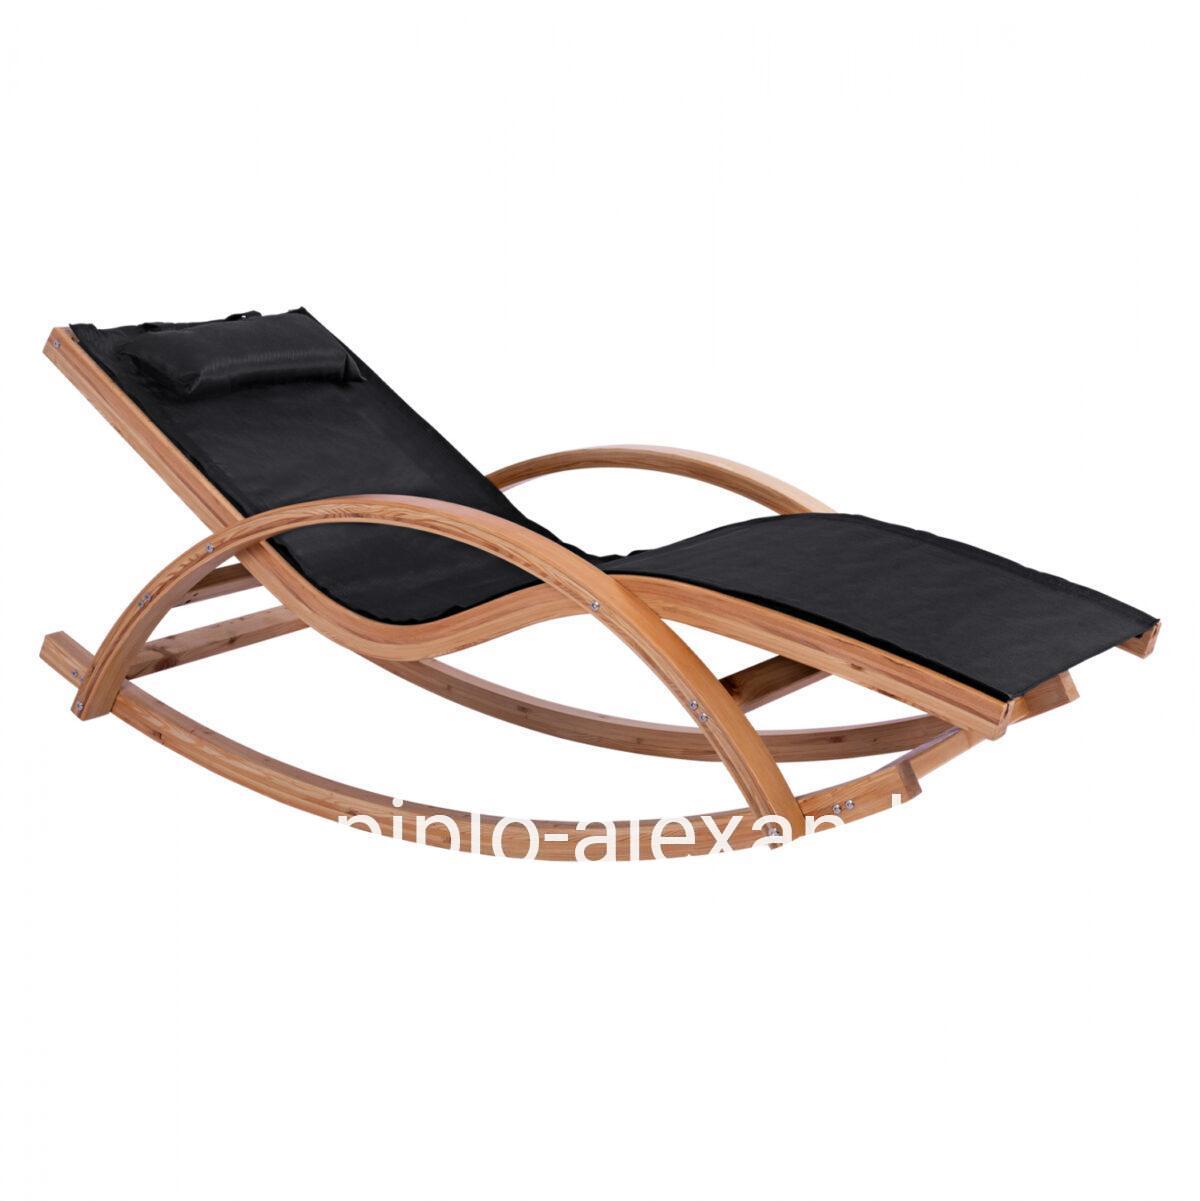 Rocking sunbed Cailin HM5666.01 Solid Pine Wood in natural color with black cloth 166x58-71x69 cm.